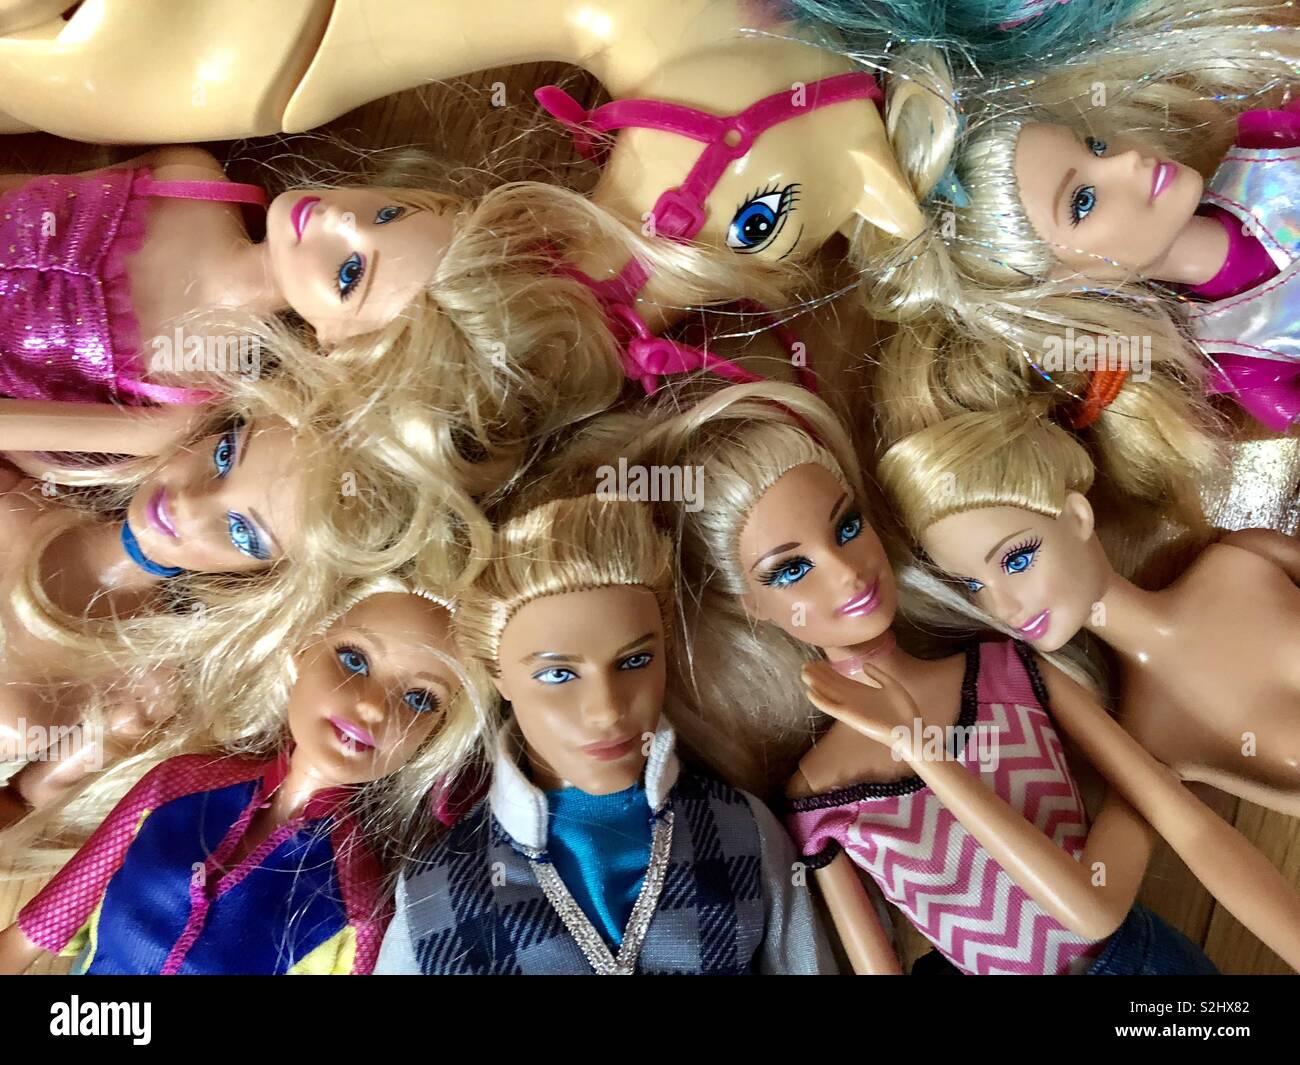 Ken Doll High Resolution Stock Photography and Images - Alamy